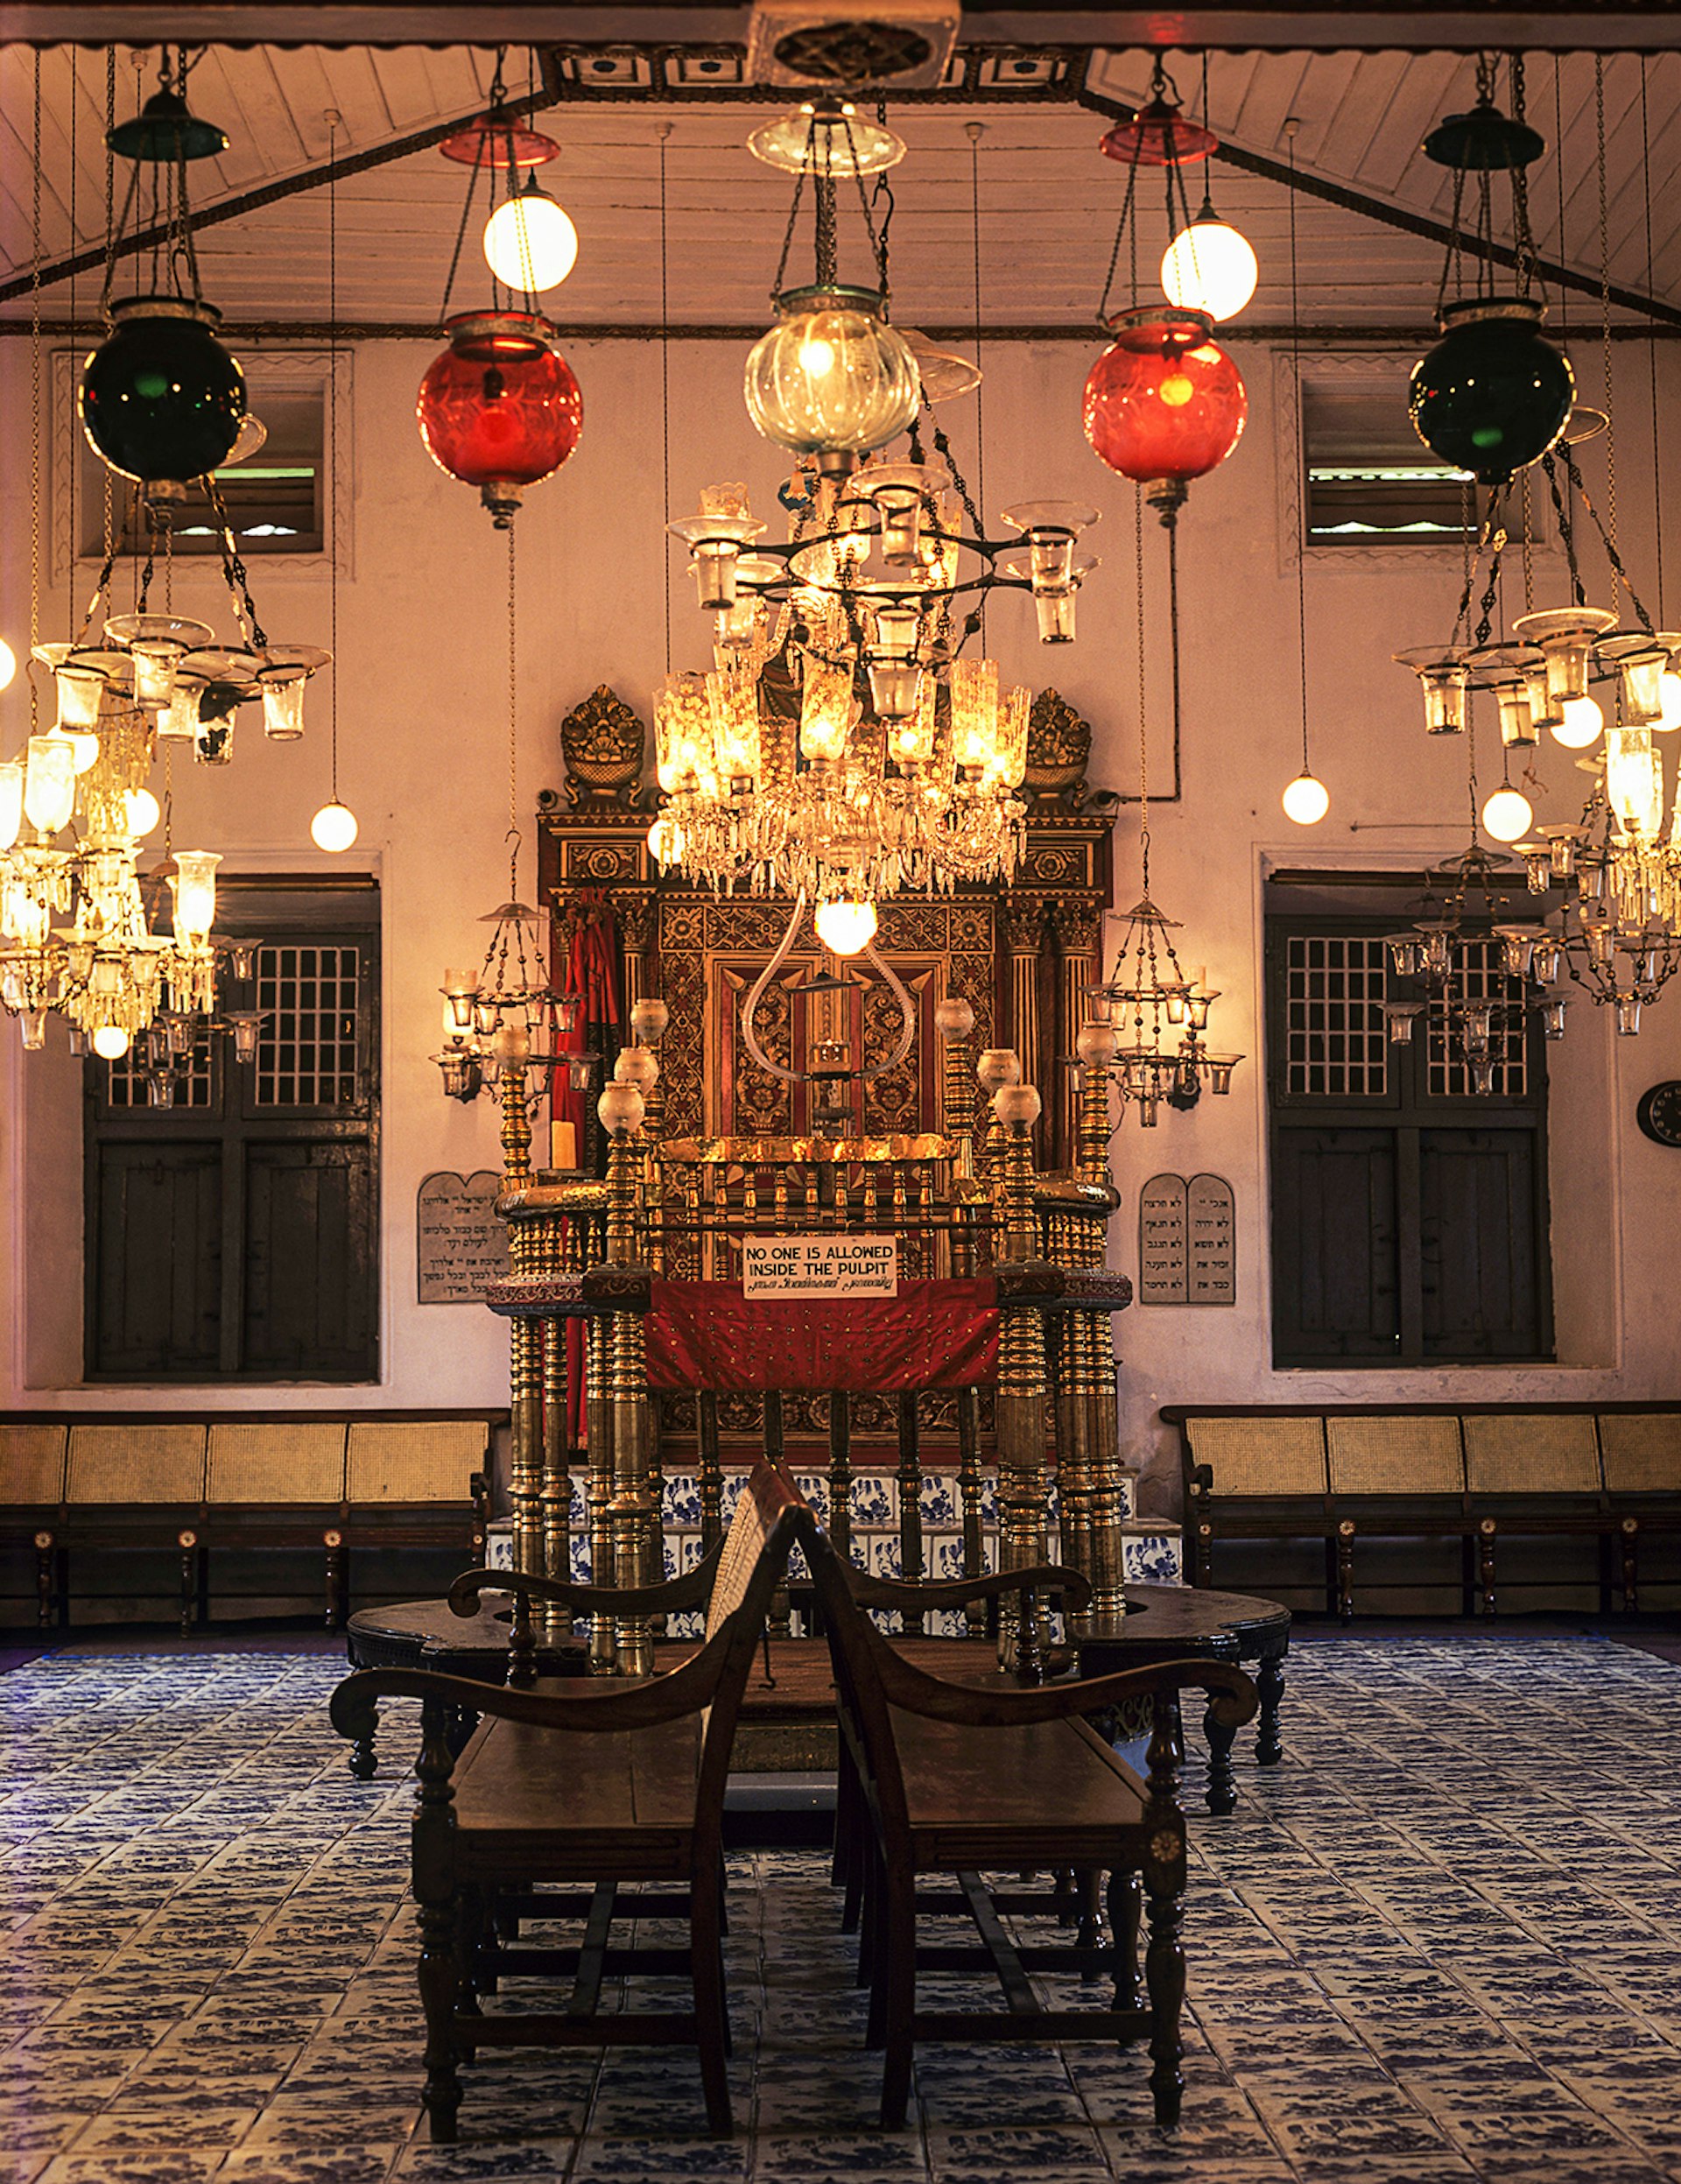 The interior of a synagogue featuring glass globe lanterns, chandeliers, and tiled floors. Kochi, India.